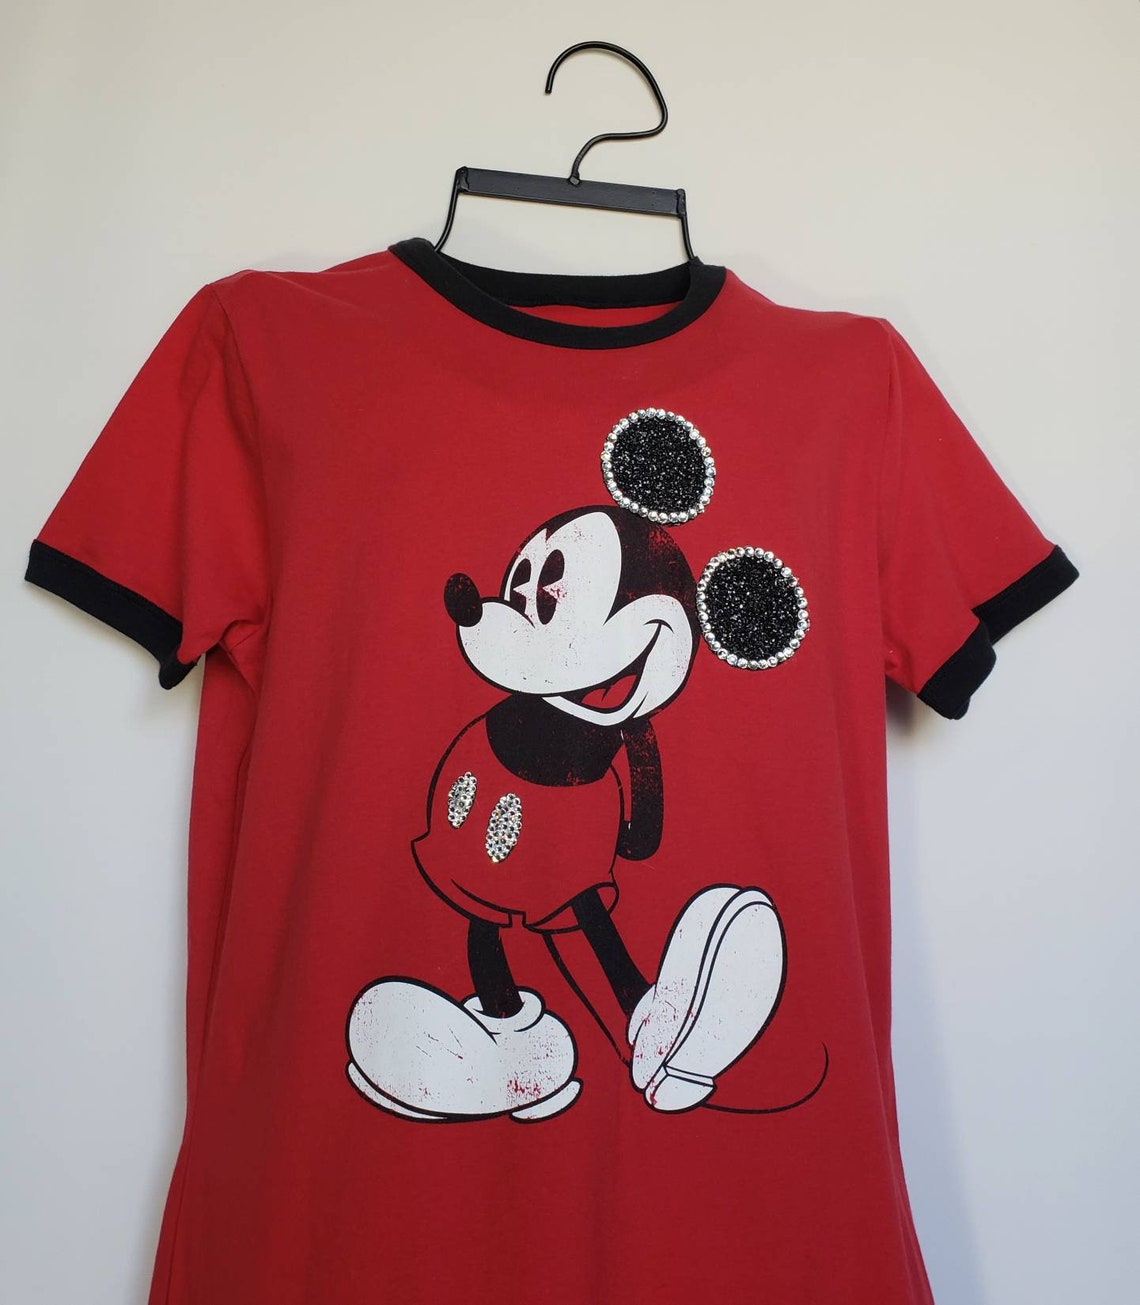 Red Mickey Mouse ringer tshirt. Mickey mouse. Red Mickey Mouse | Etsy